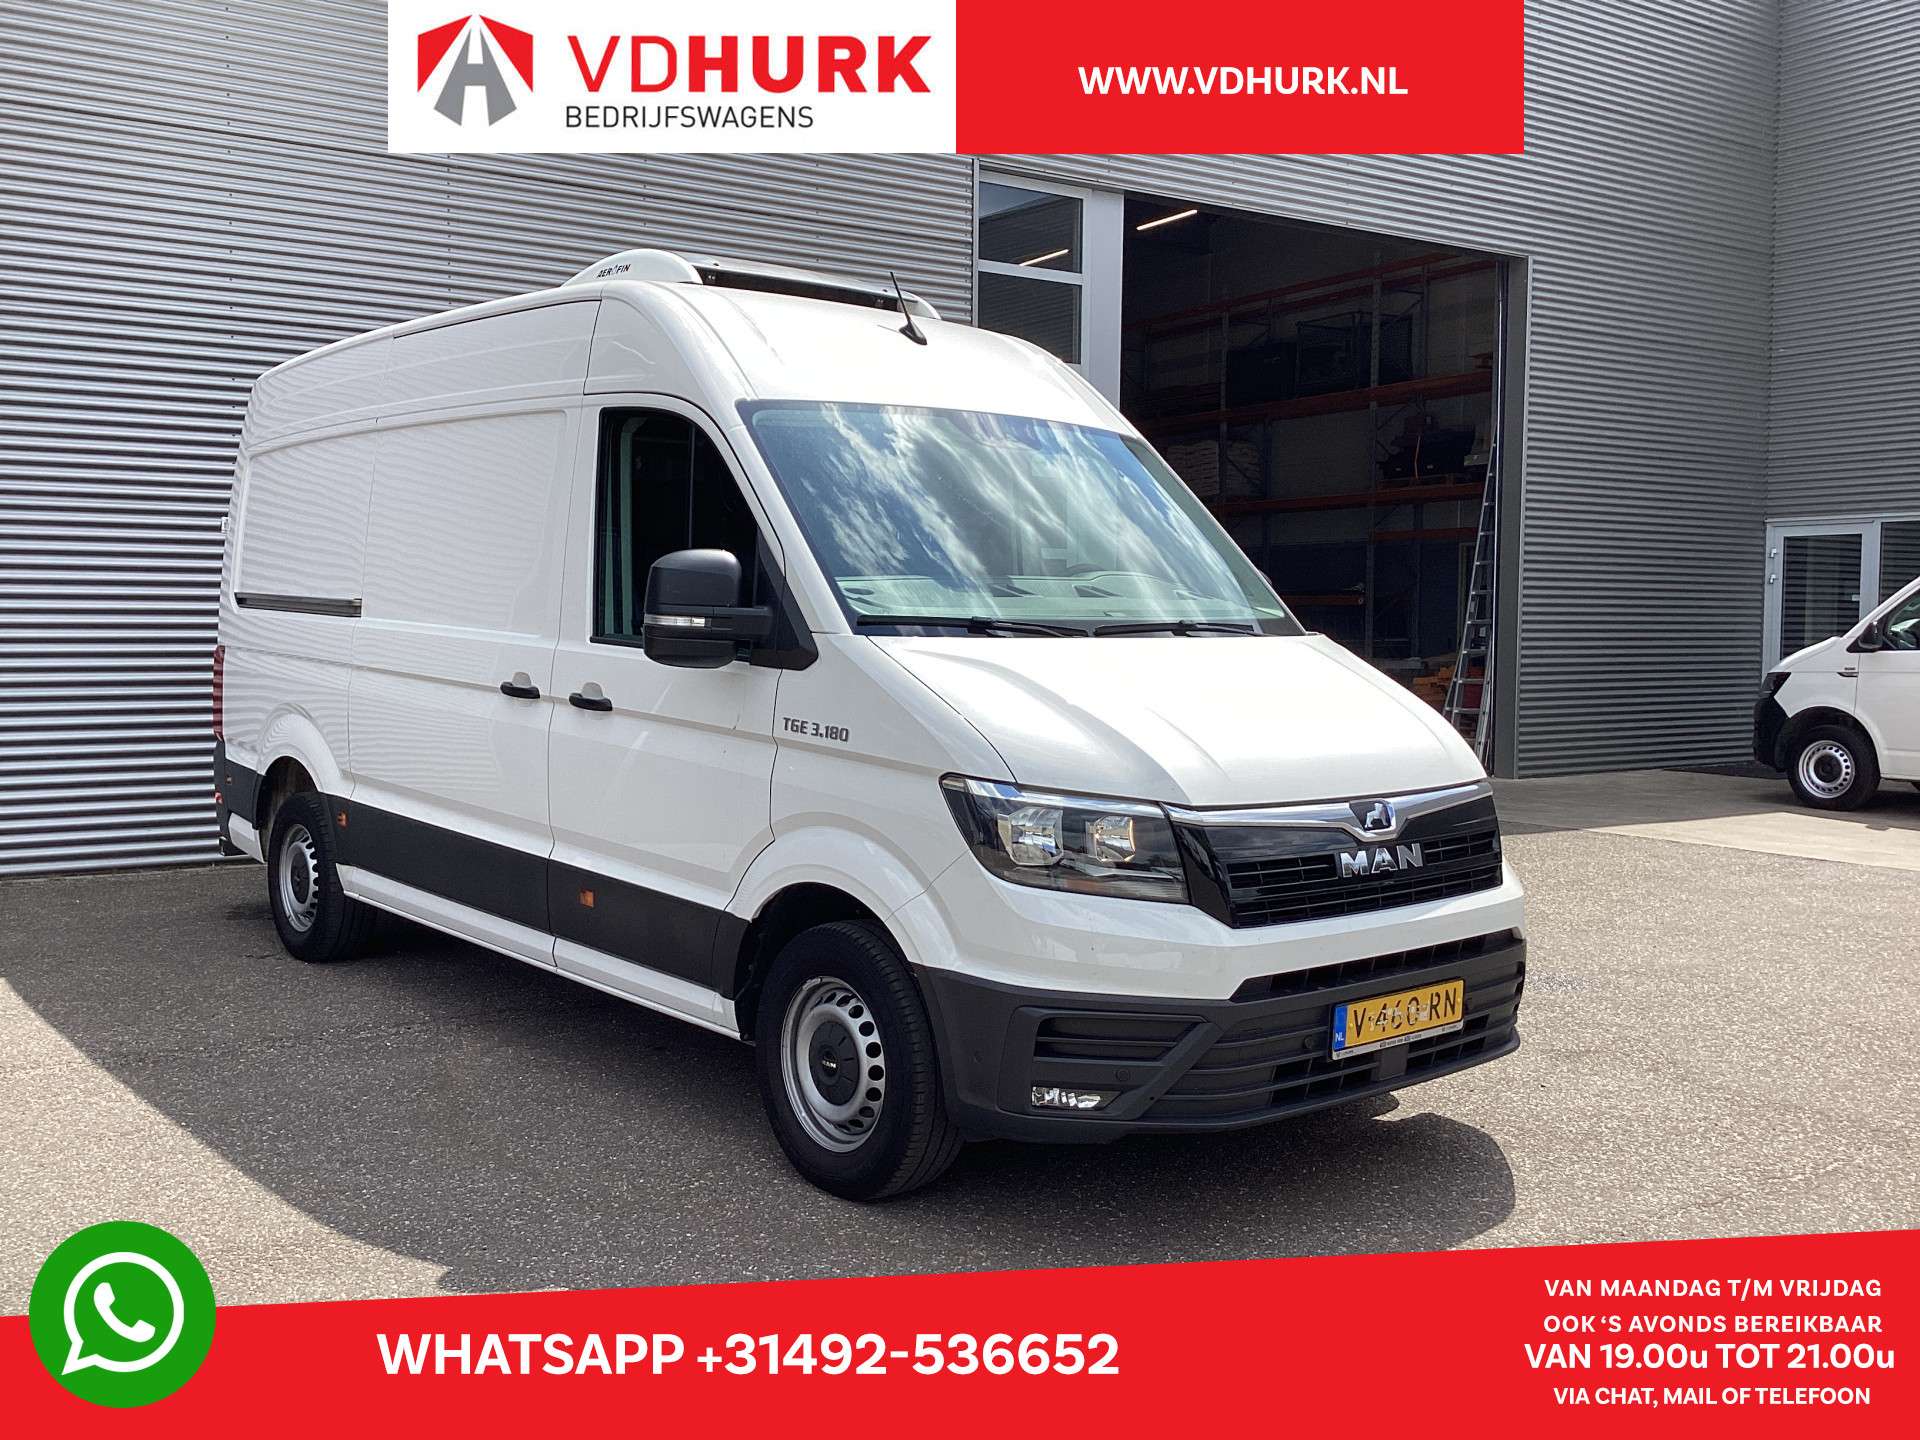 MAN TGE Transporter in White used in HELMOND for € 33,207.-